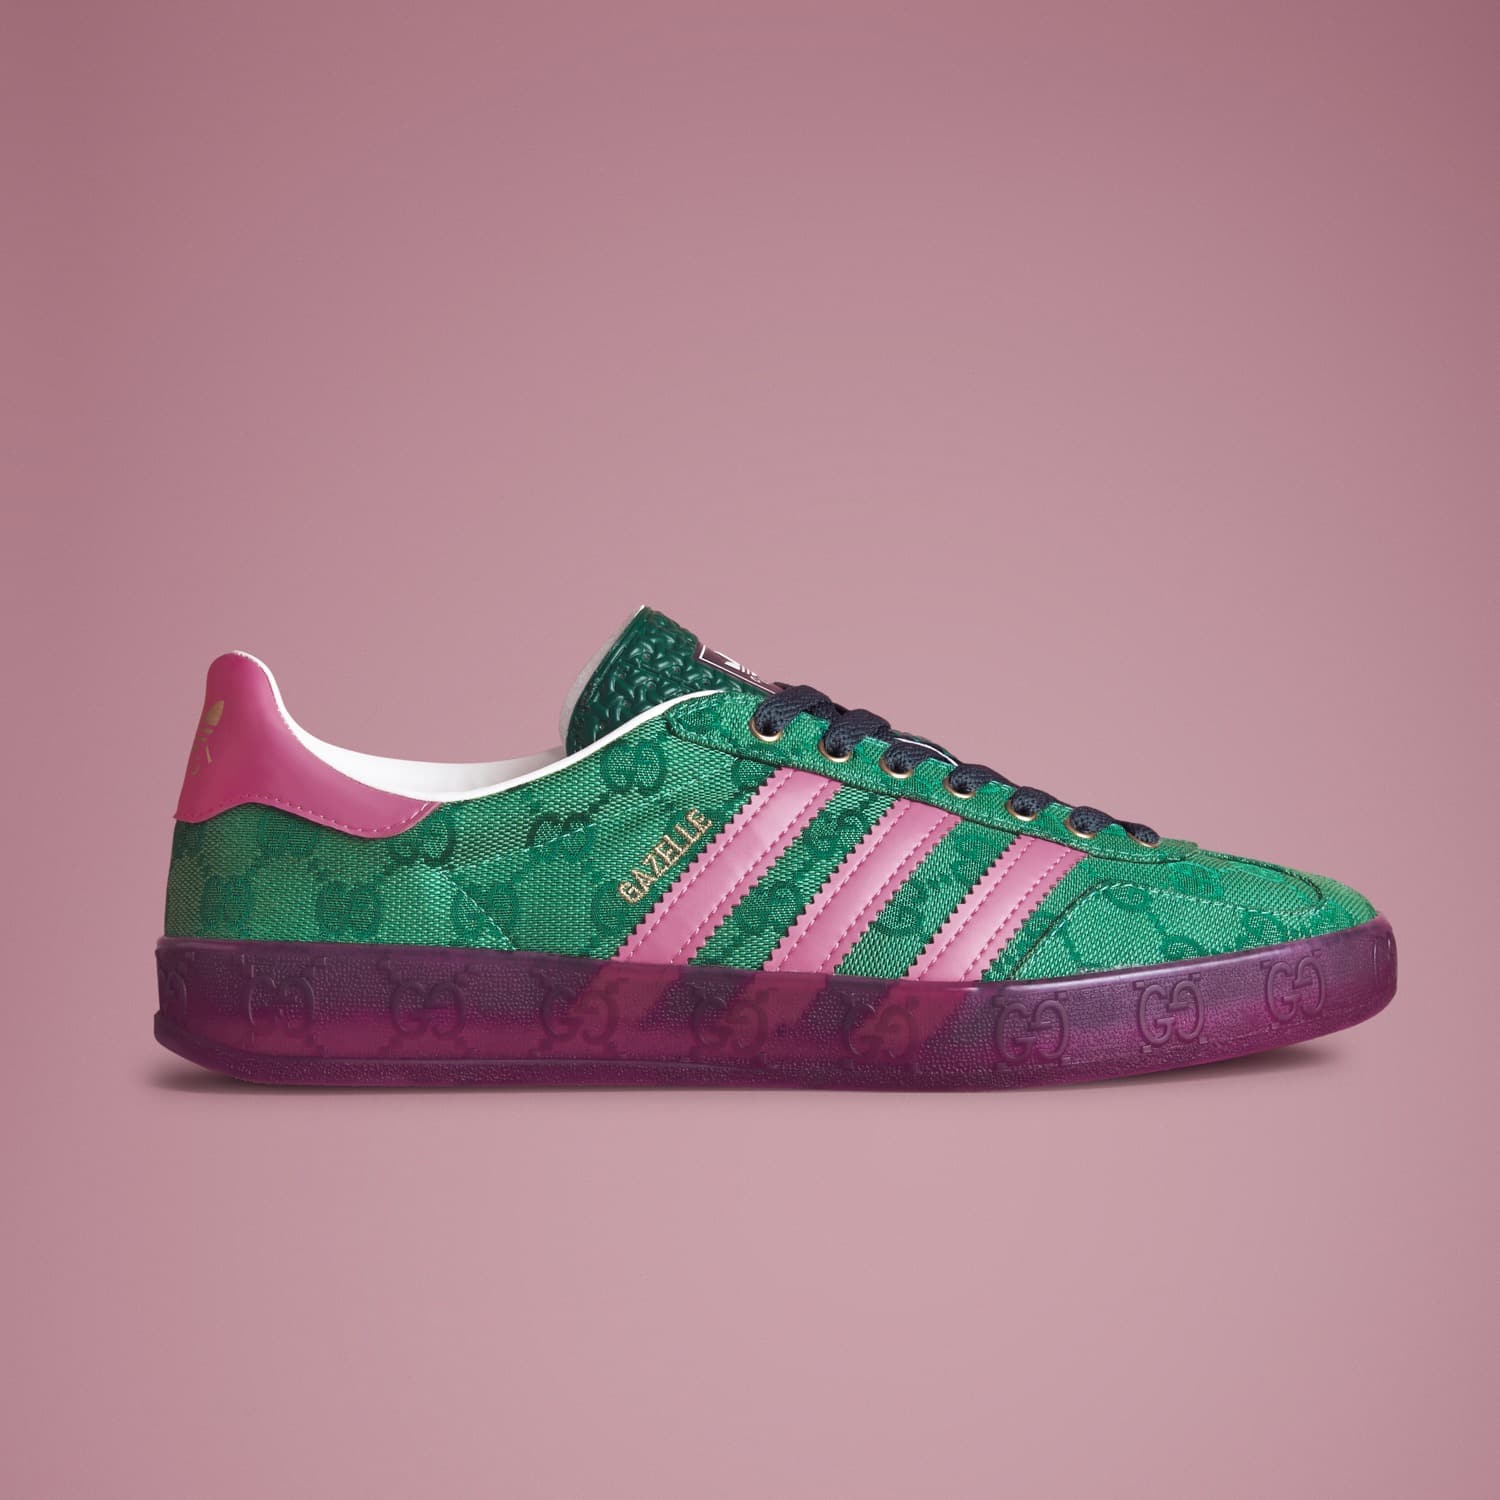 Sneakers adidas x Gucci Spring 2023 8